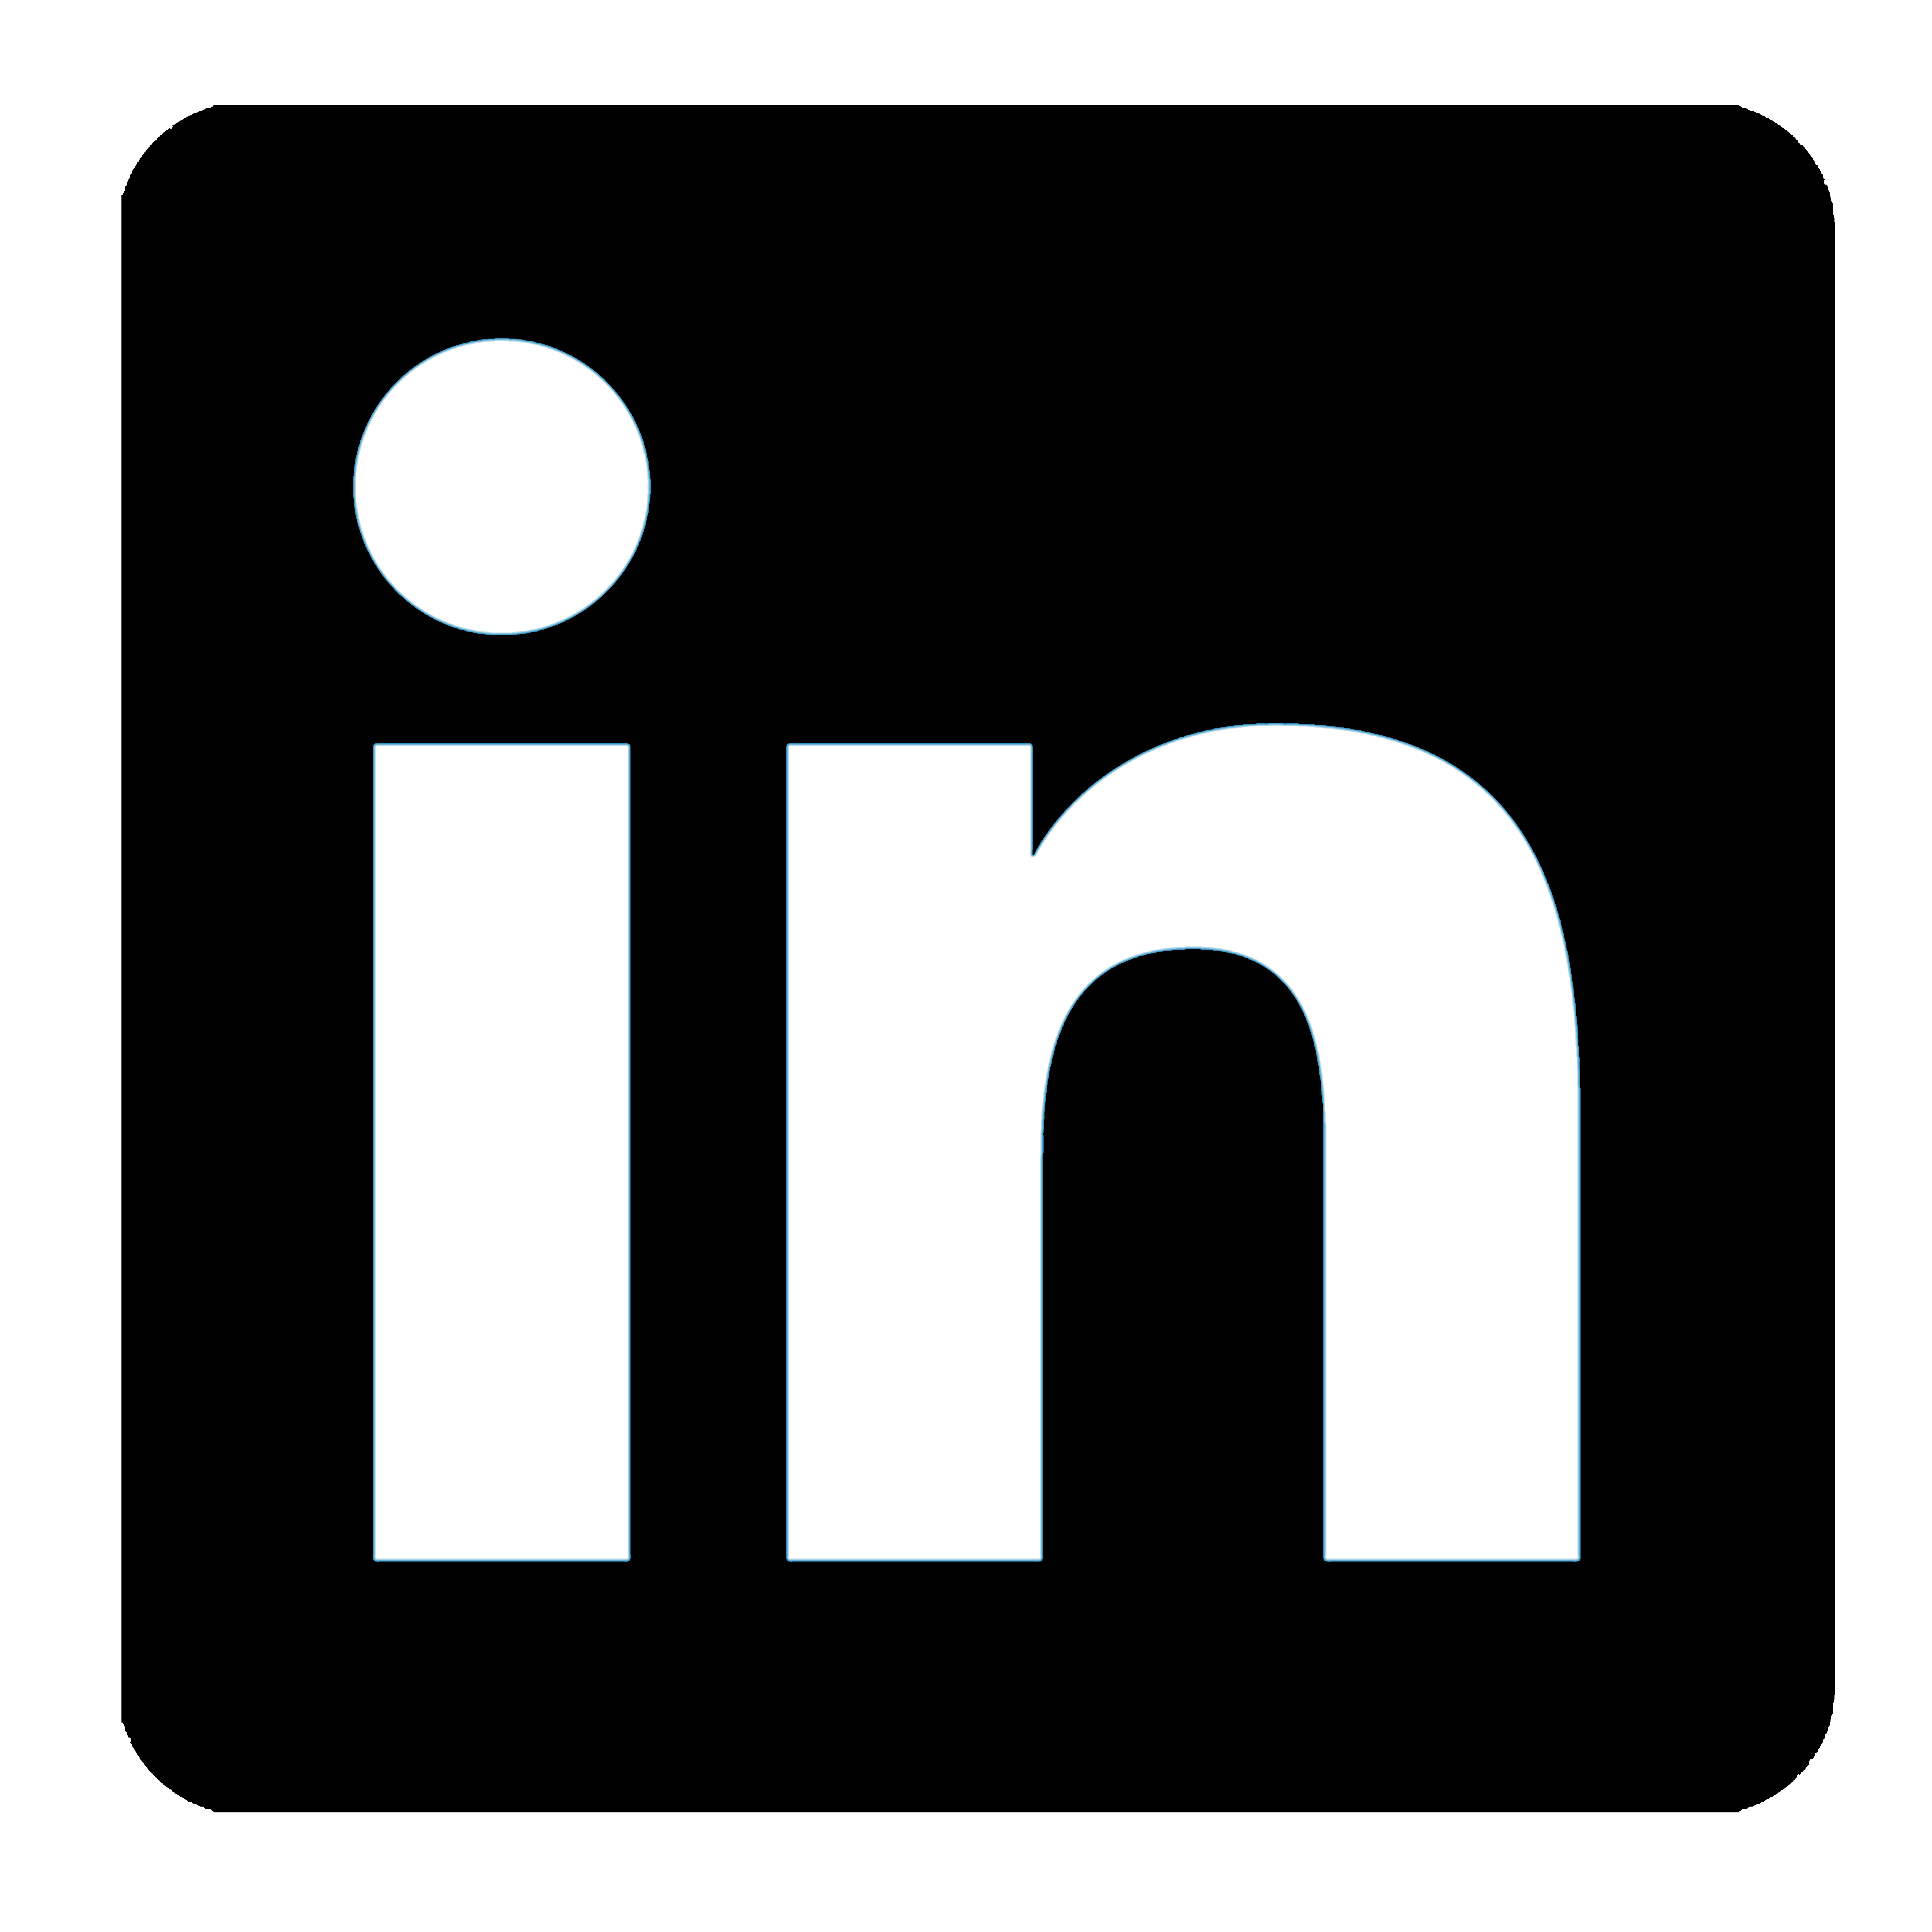 The icon for LinkedIn